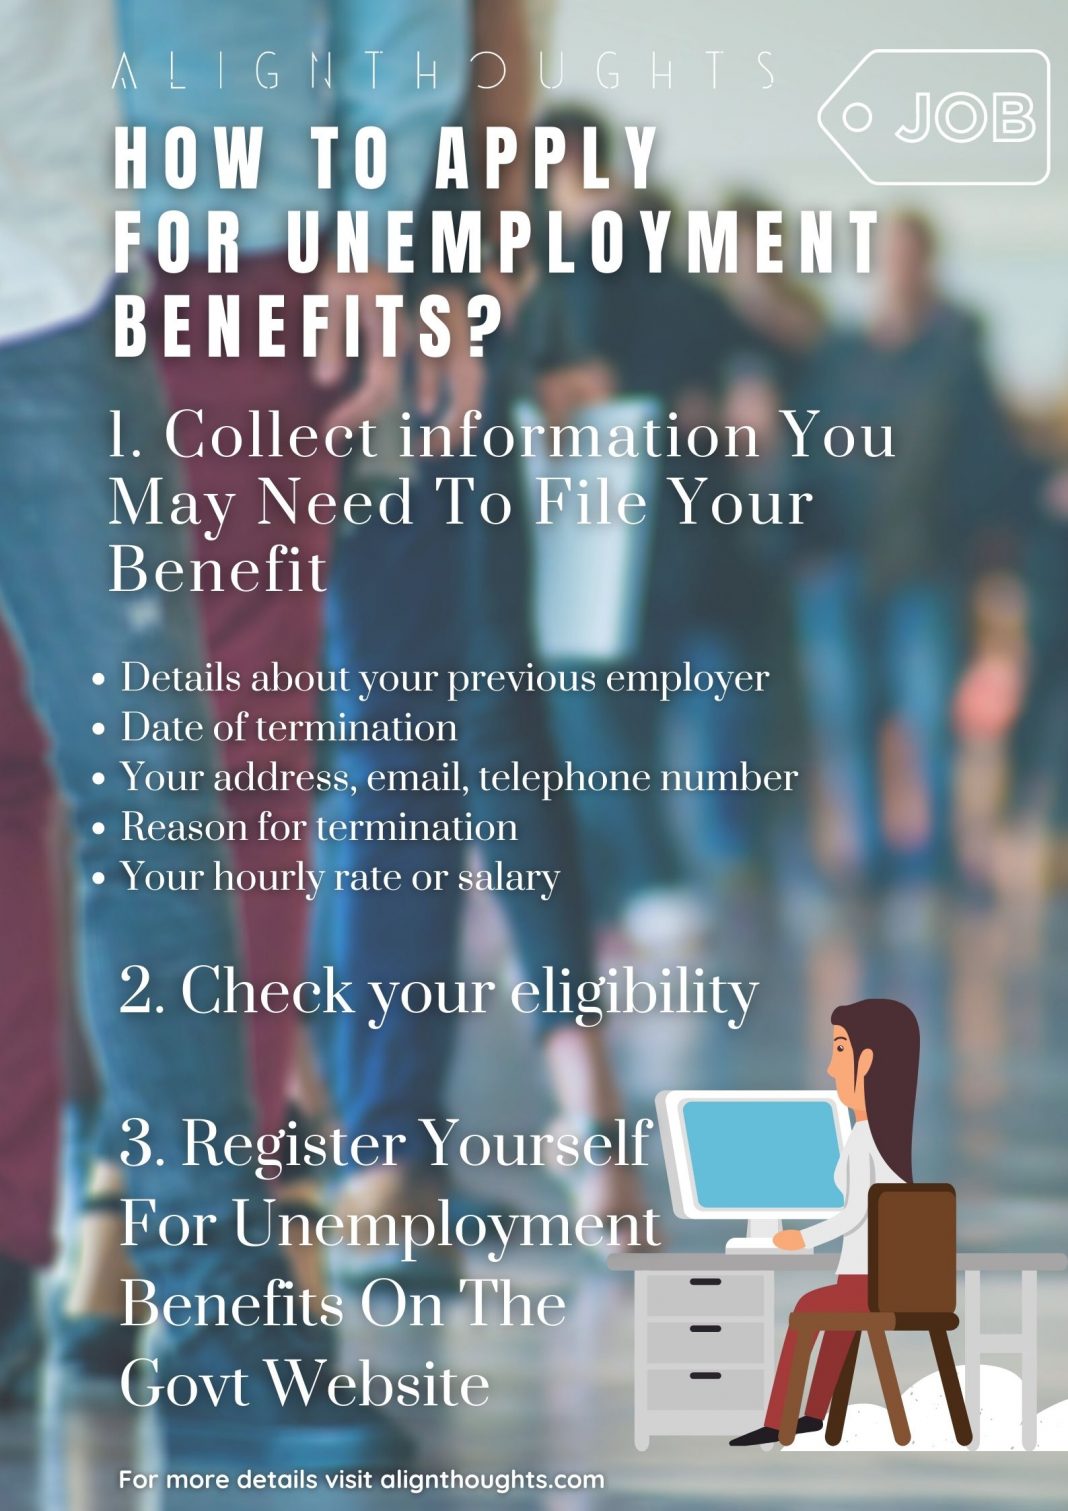 Dealing With Unemployment Stress? Things To Do When Unemployed